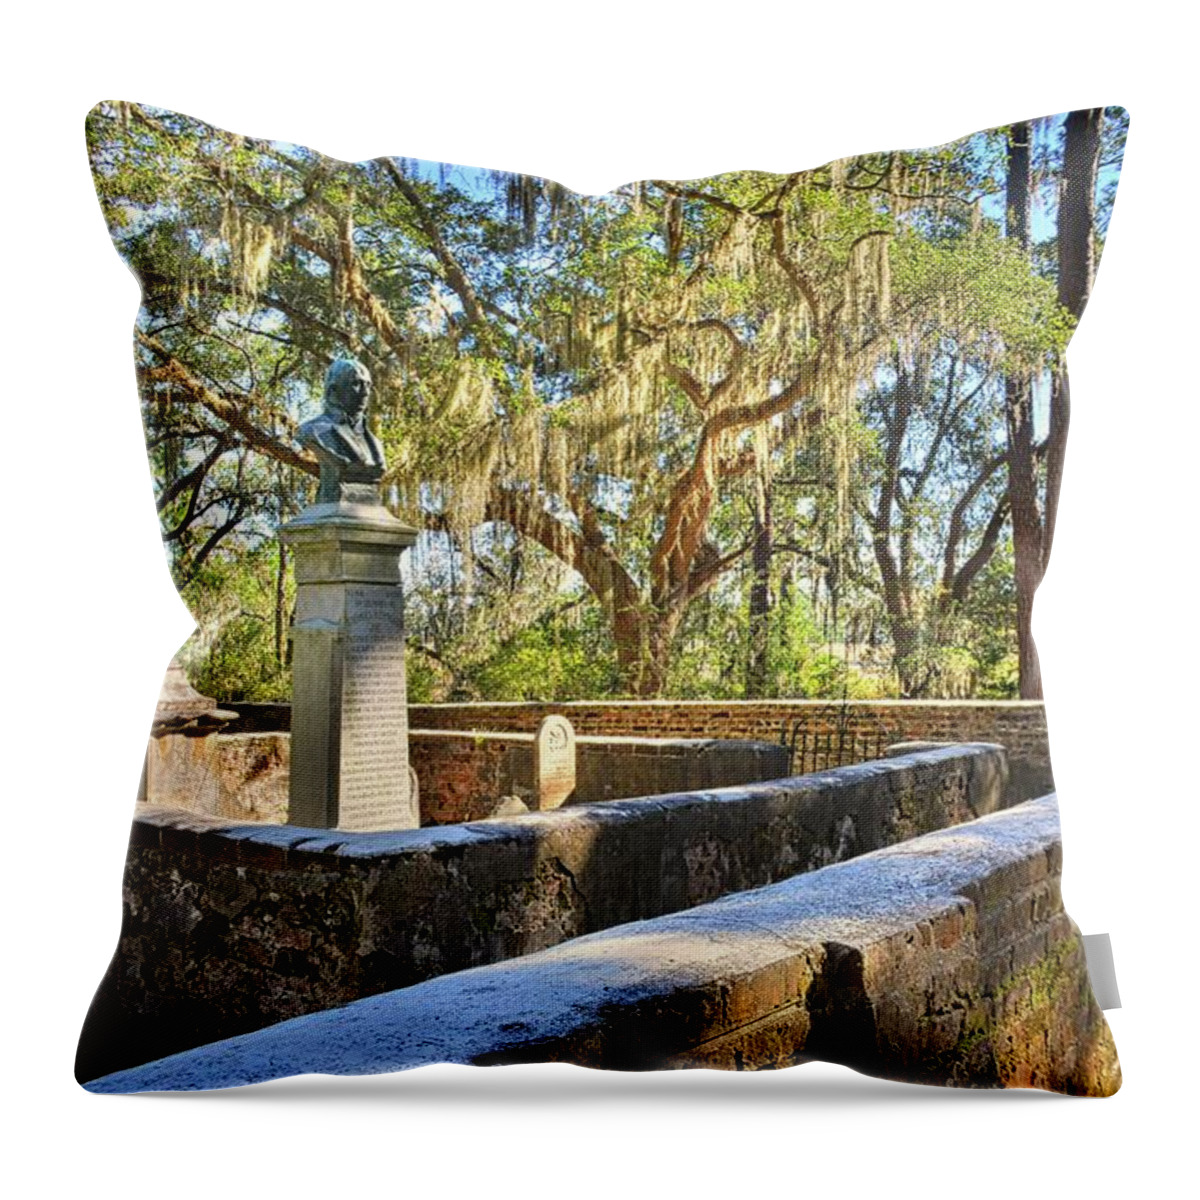 Old House Plantation Cemetery Throw Pillow featuring the photograph Old House Plantation Cemetery by Lisa Wooten